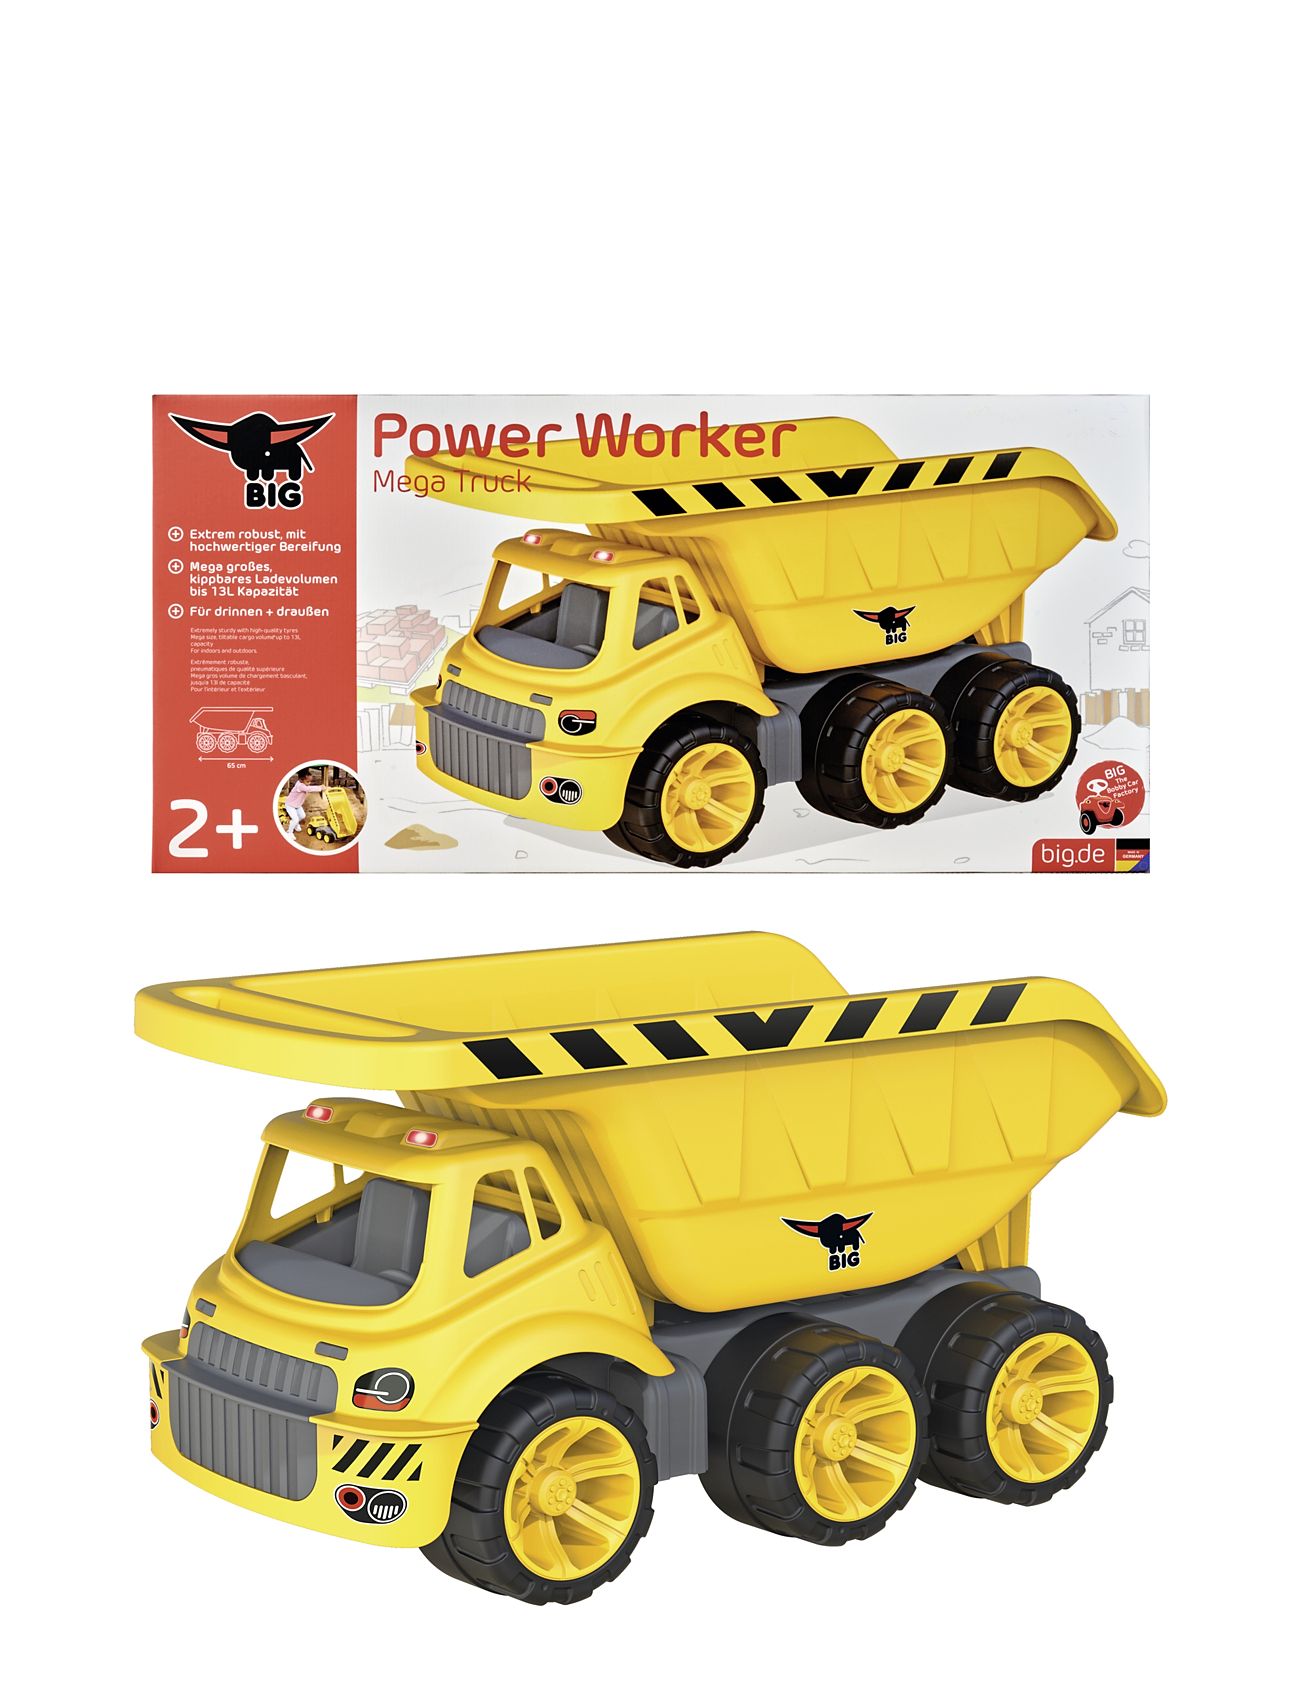 Big Power Worker Mega Truck Toys Toy Cars & Vehicles Toy Cars Garbage Trucks Yellow BIG